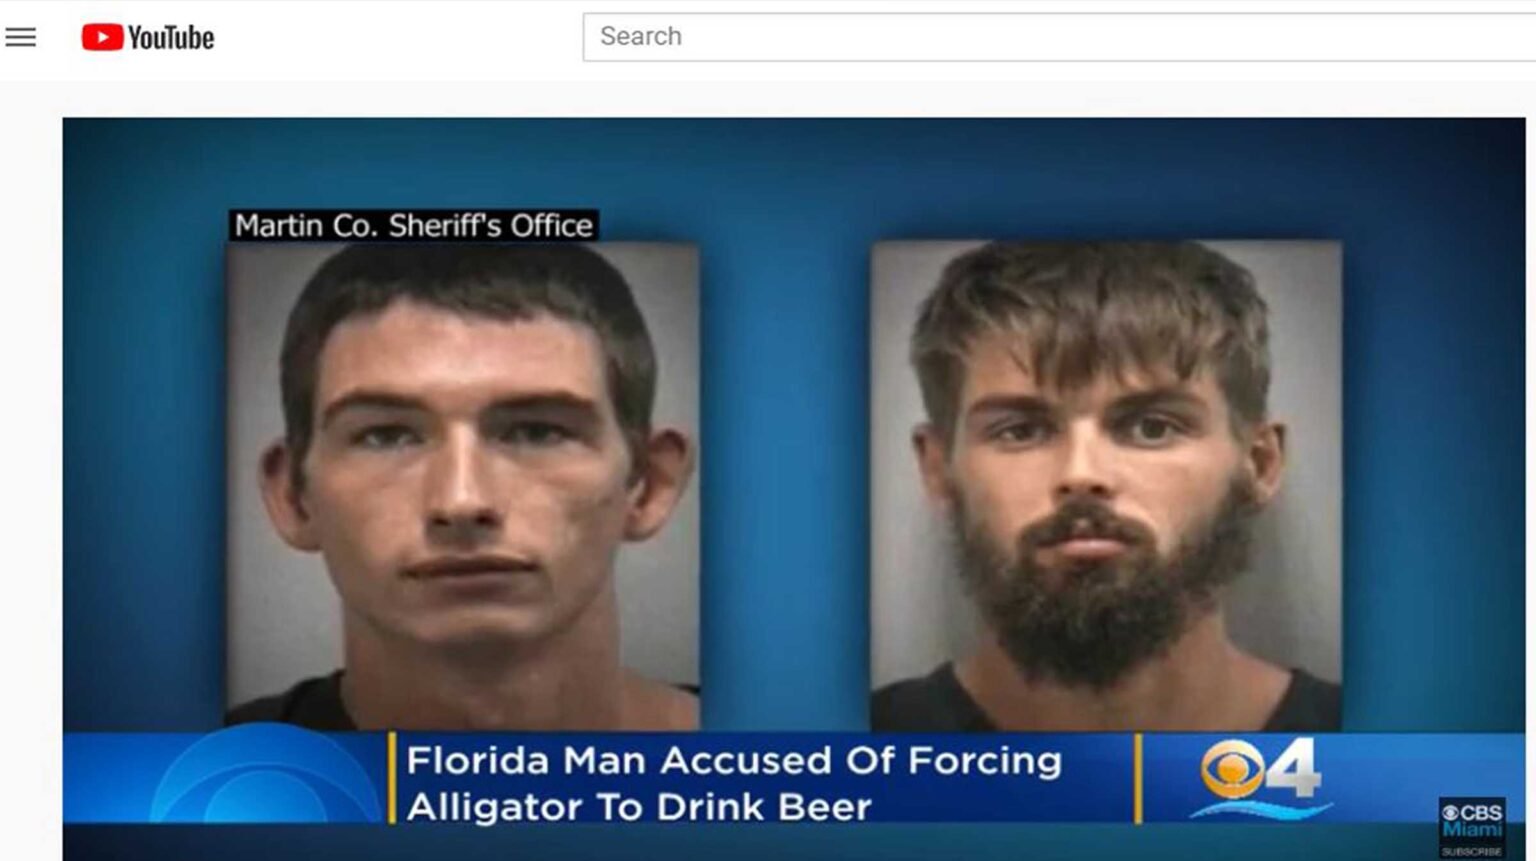 Ah the mythical Florida man. Yes, the Florida man headlines are hilarious. Here are some of the craziest Florida Man headlines.